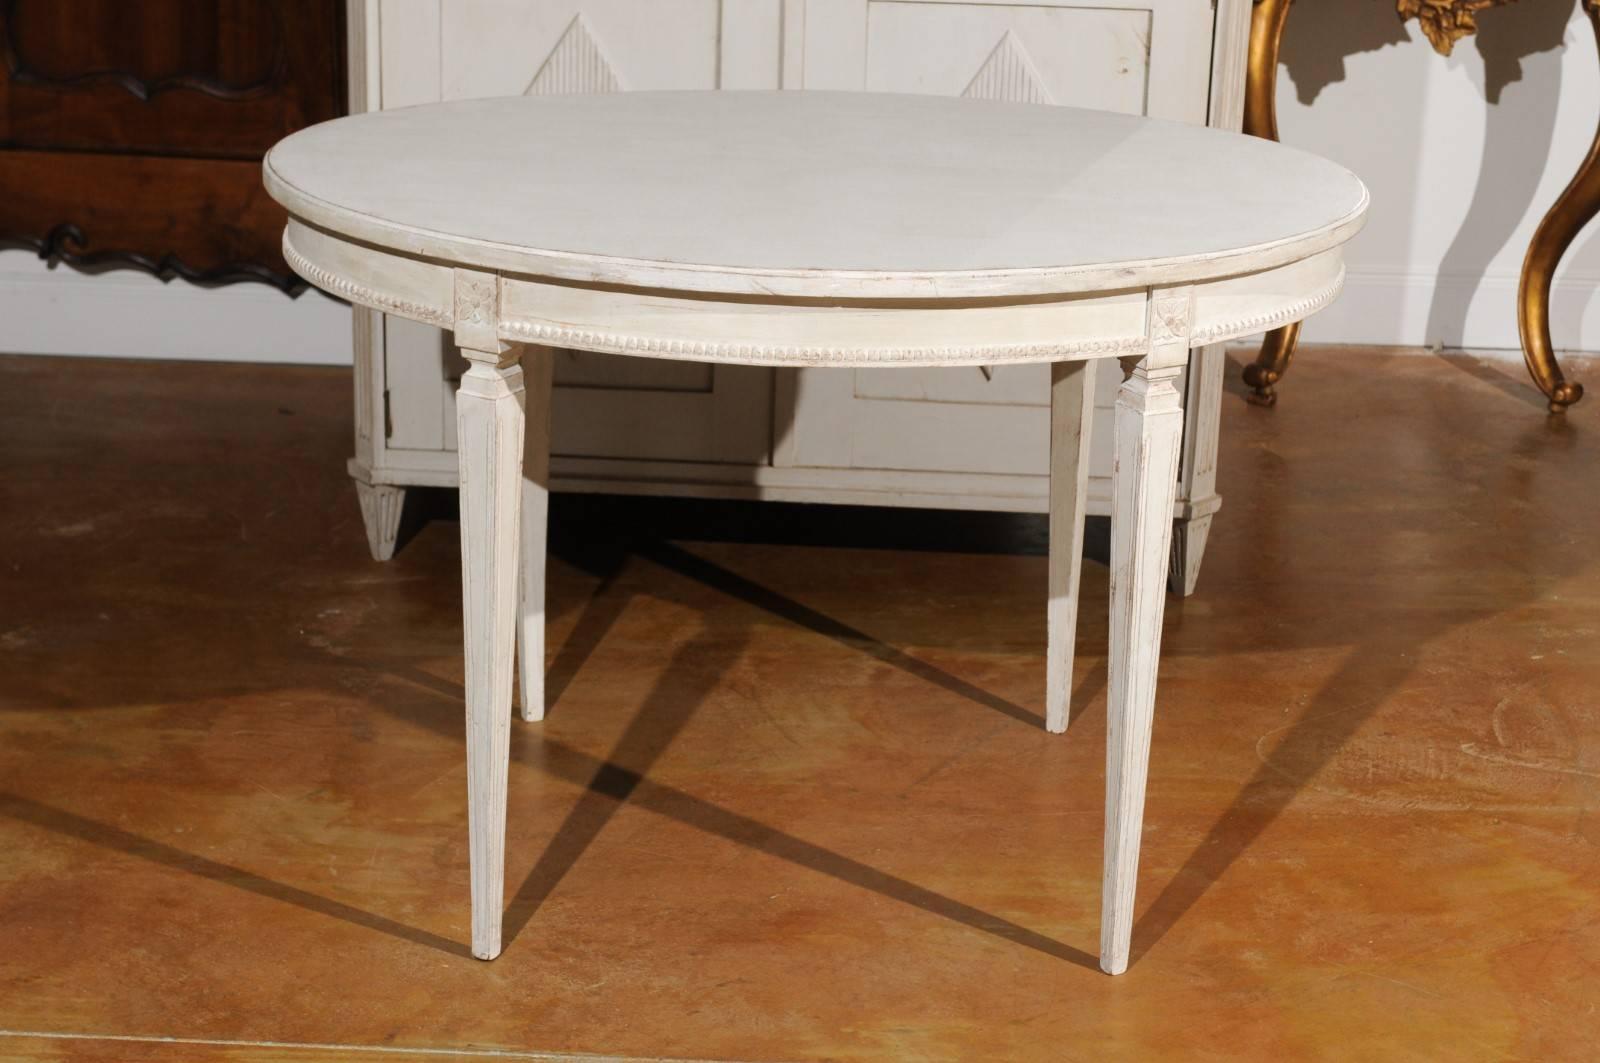 Gustavian Style 1900s Swedish Painted Oval Table from Växjö with Beaded Motifs 1